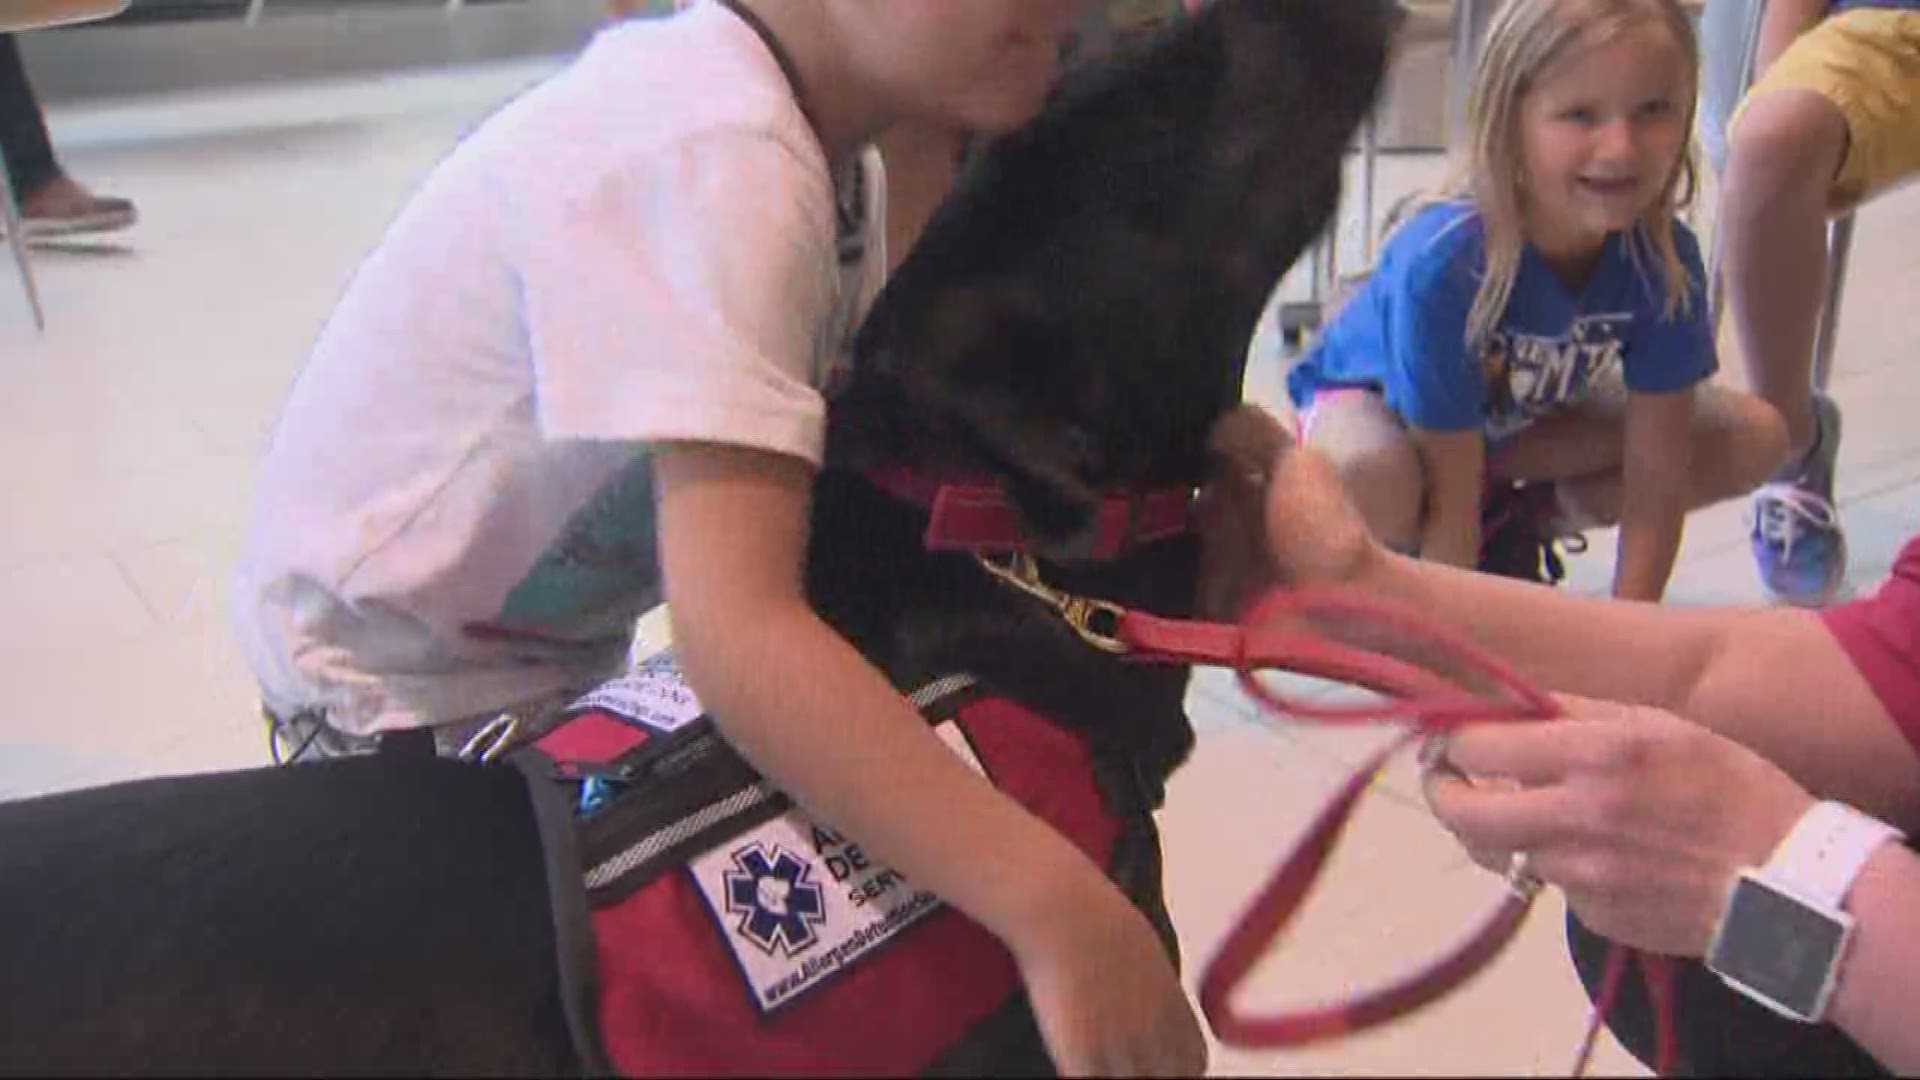 Gresham family welcome therapy dog that can detect gluten. KGW, Aug. 1, 2017